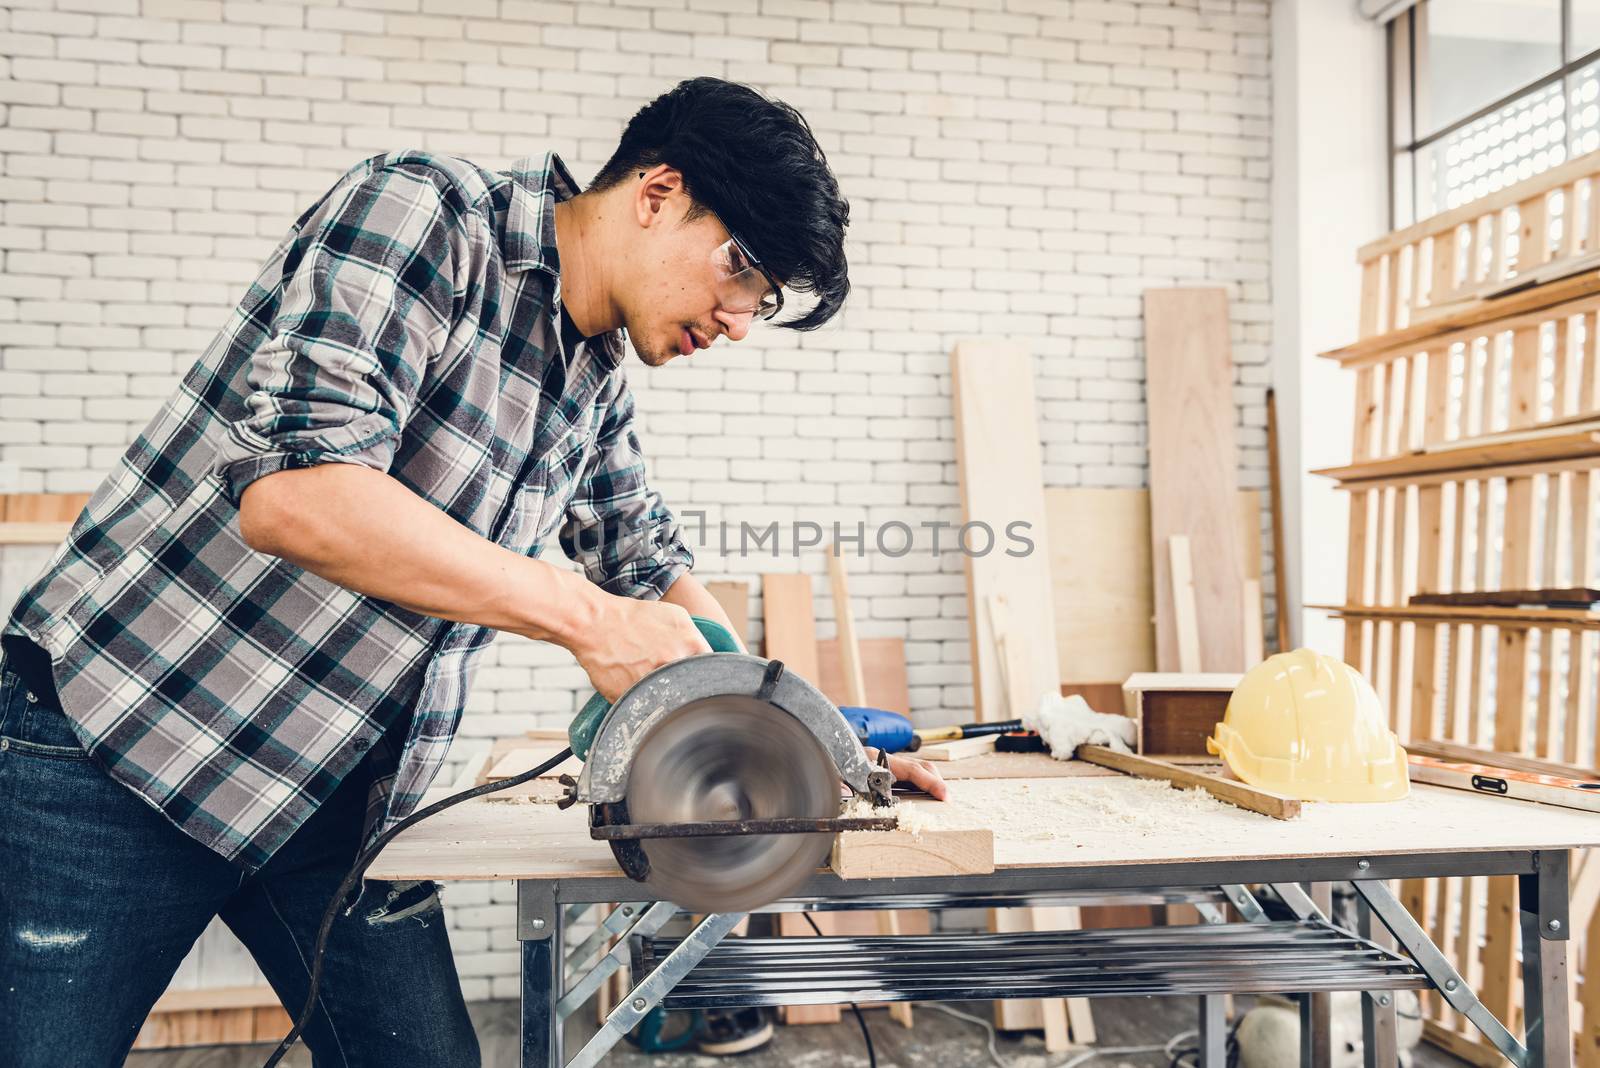 Carpenter Man is Working Timber Woodworking in Carpentry Workshops, Craftsman is Using Sawing Machine Cutting Timber Frame for Wooden Furniture in Workshop. Workmanship and Job Occupation Concept